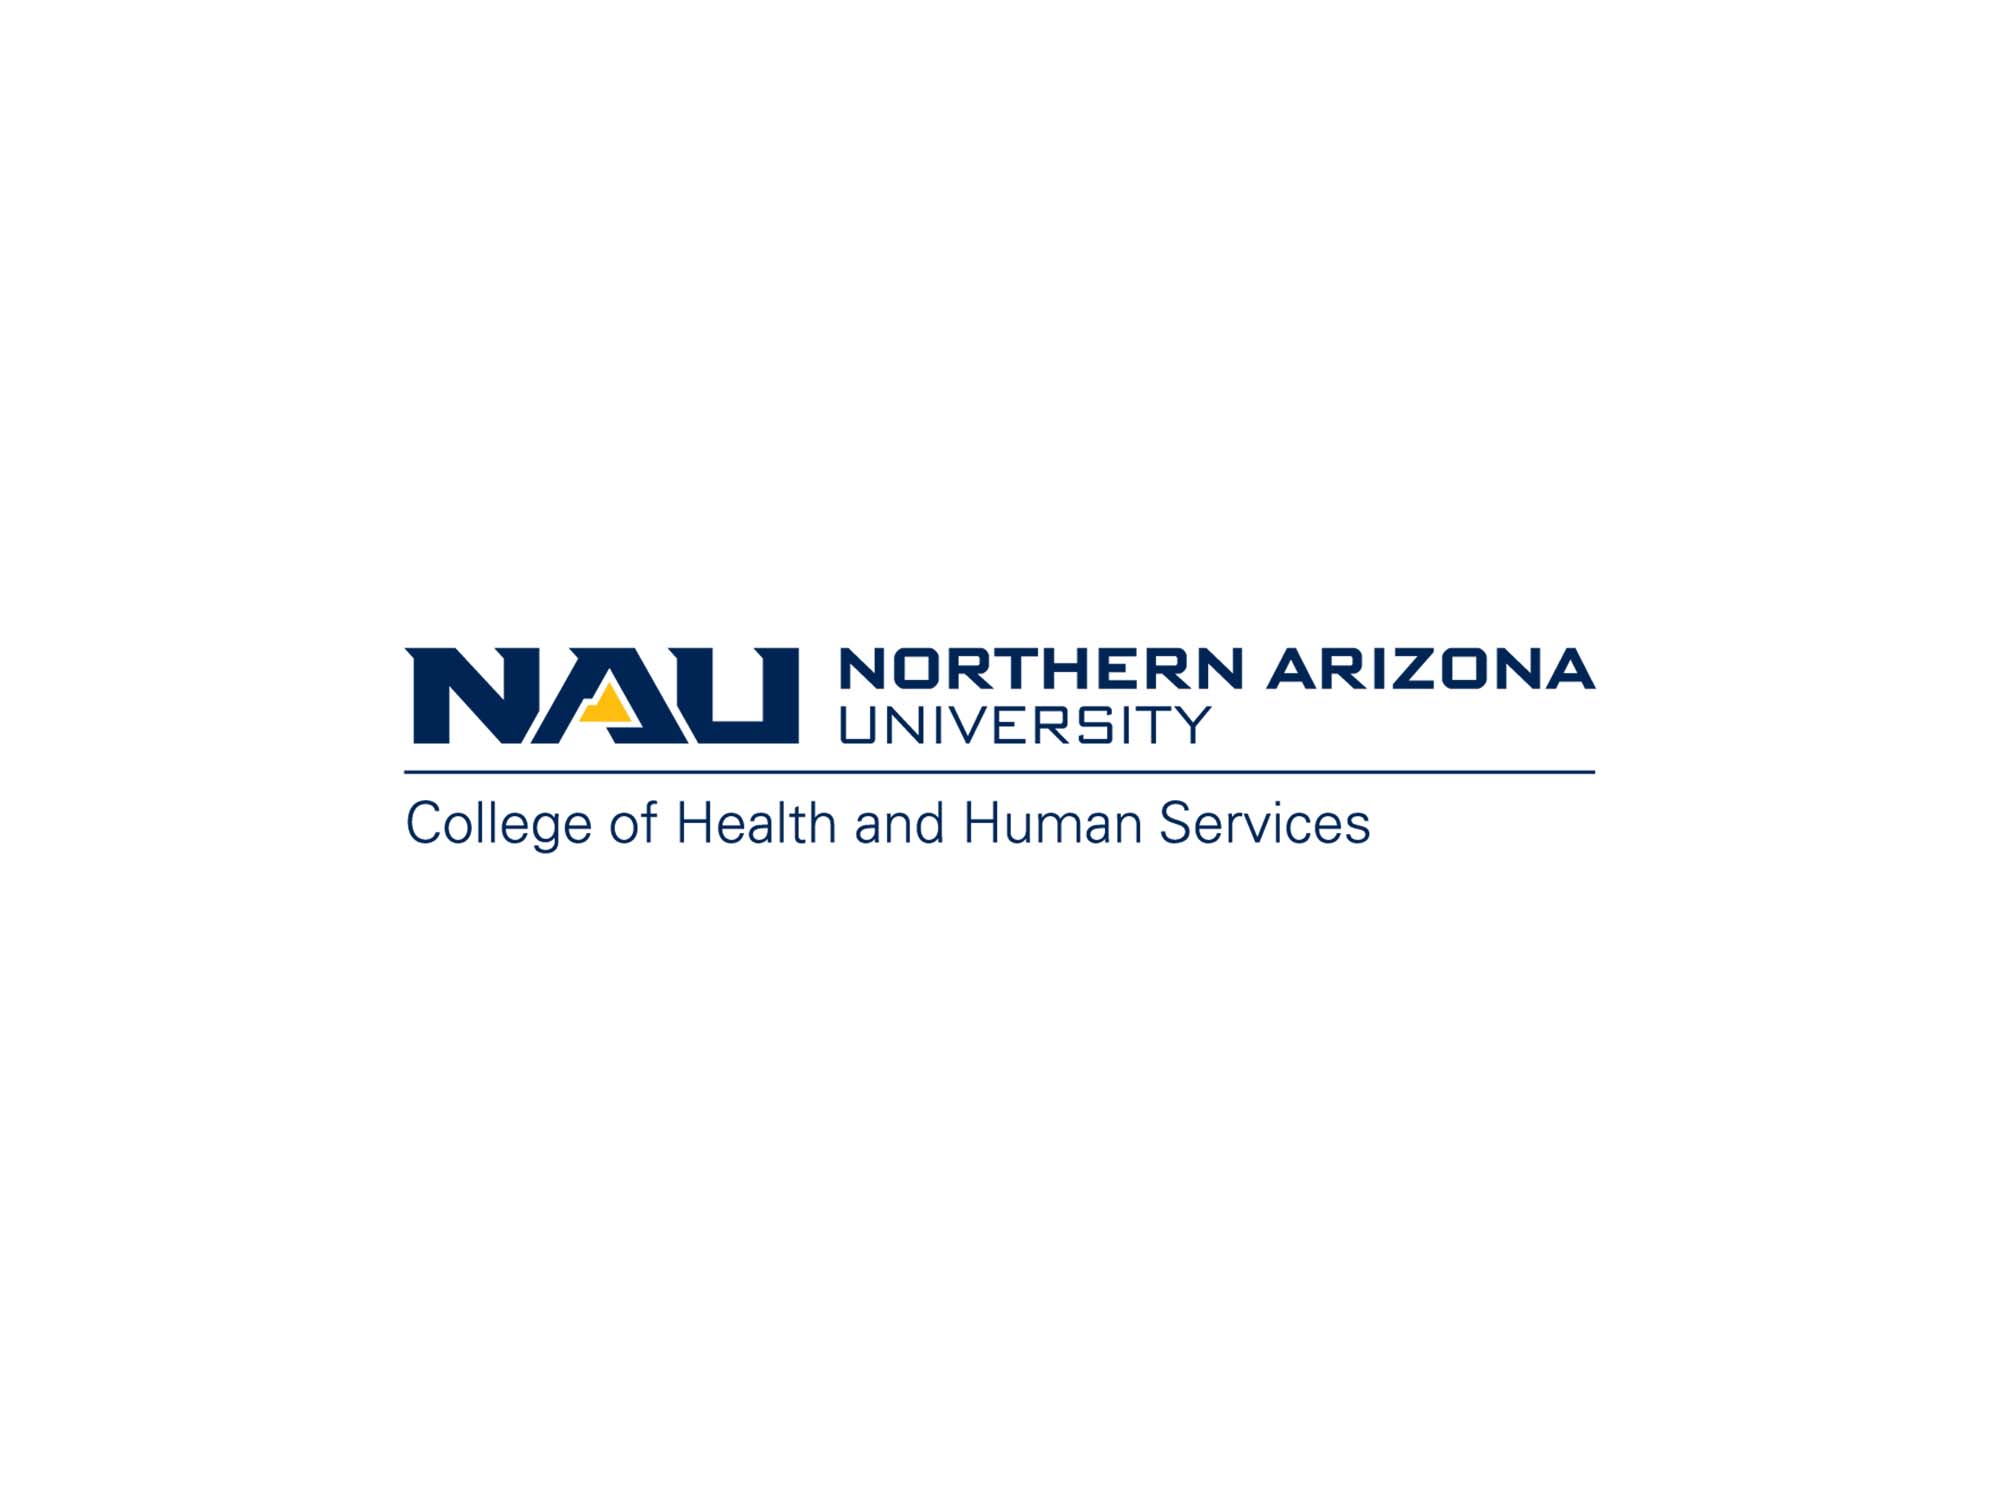 Logo for Northern Arizona University's College of Health and Human Services